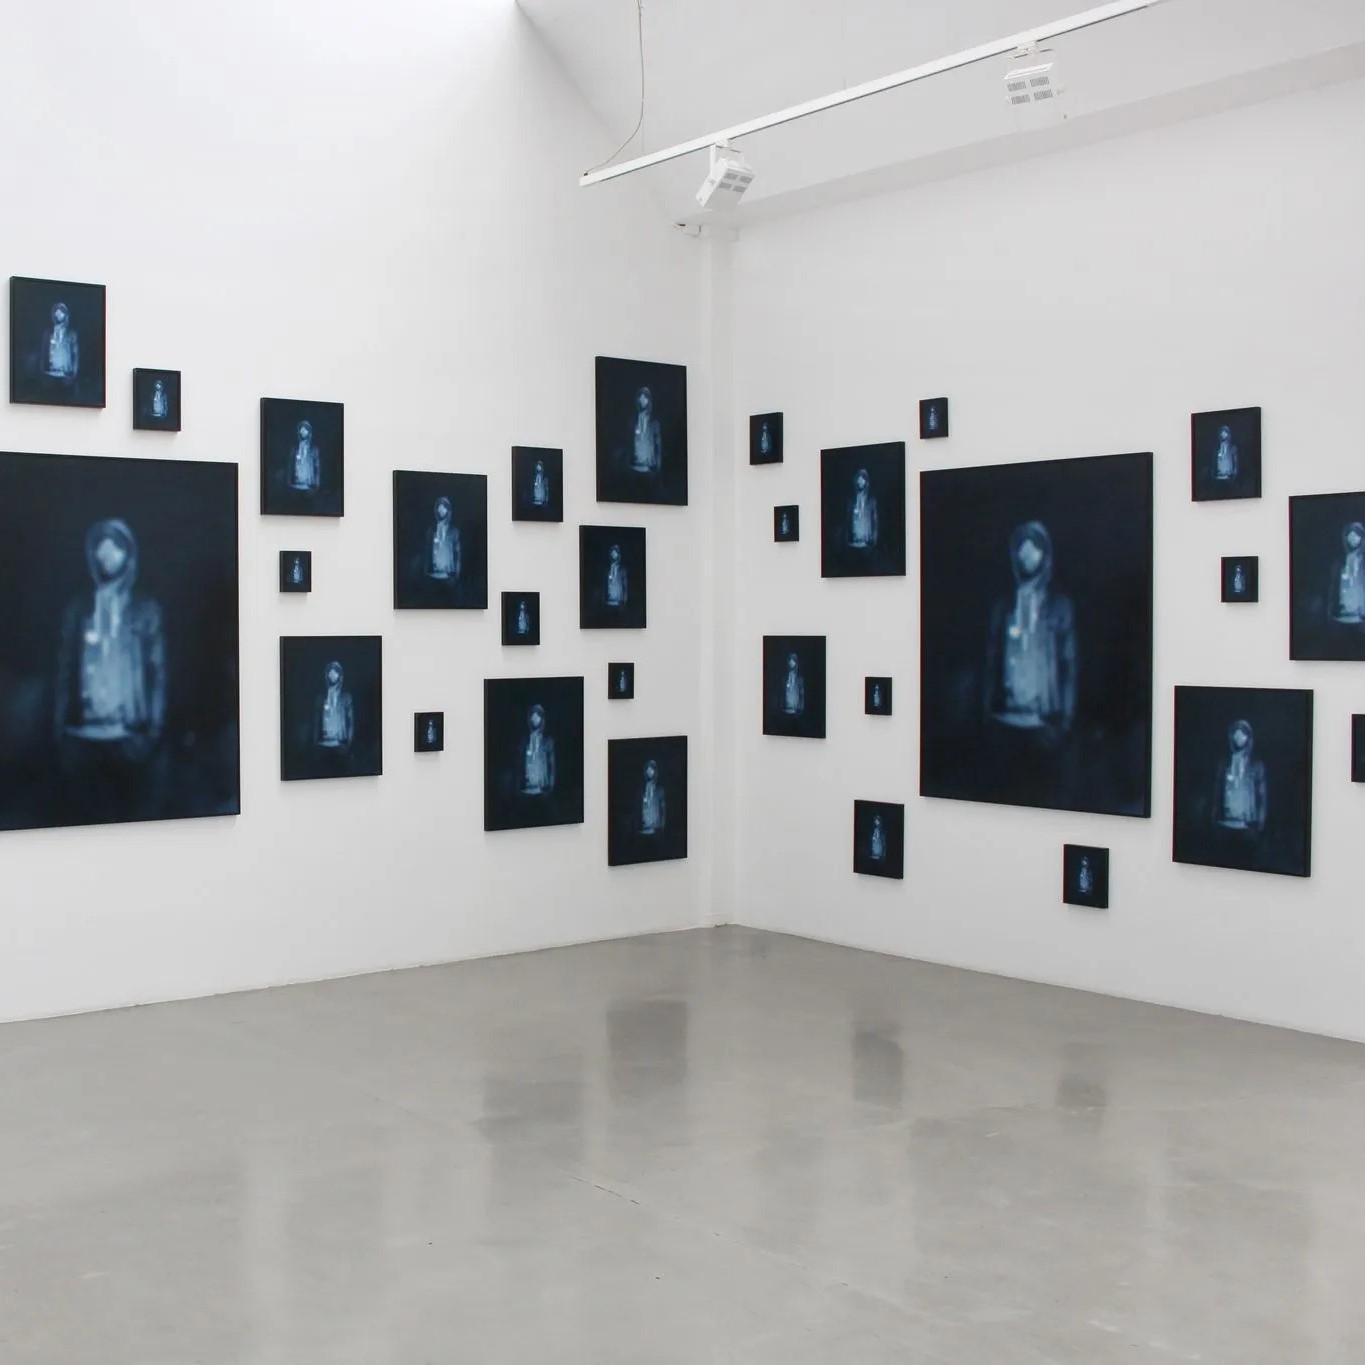 Carrie Mae Weems, Repeating the Obvious, exposition Une seconde d'éternité